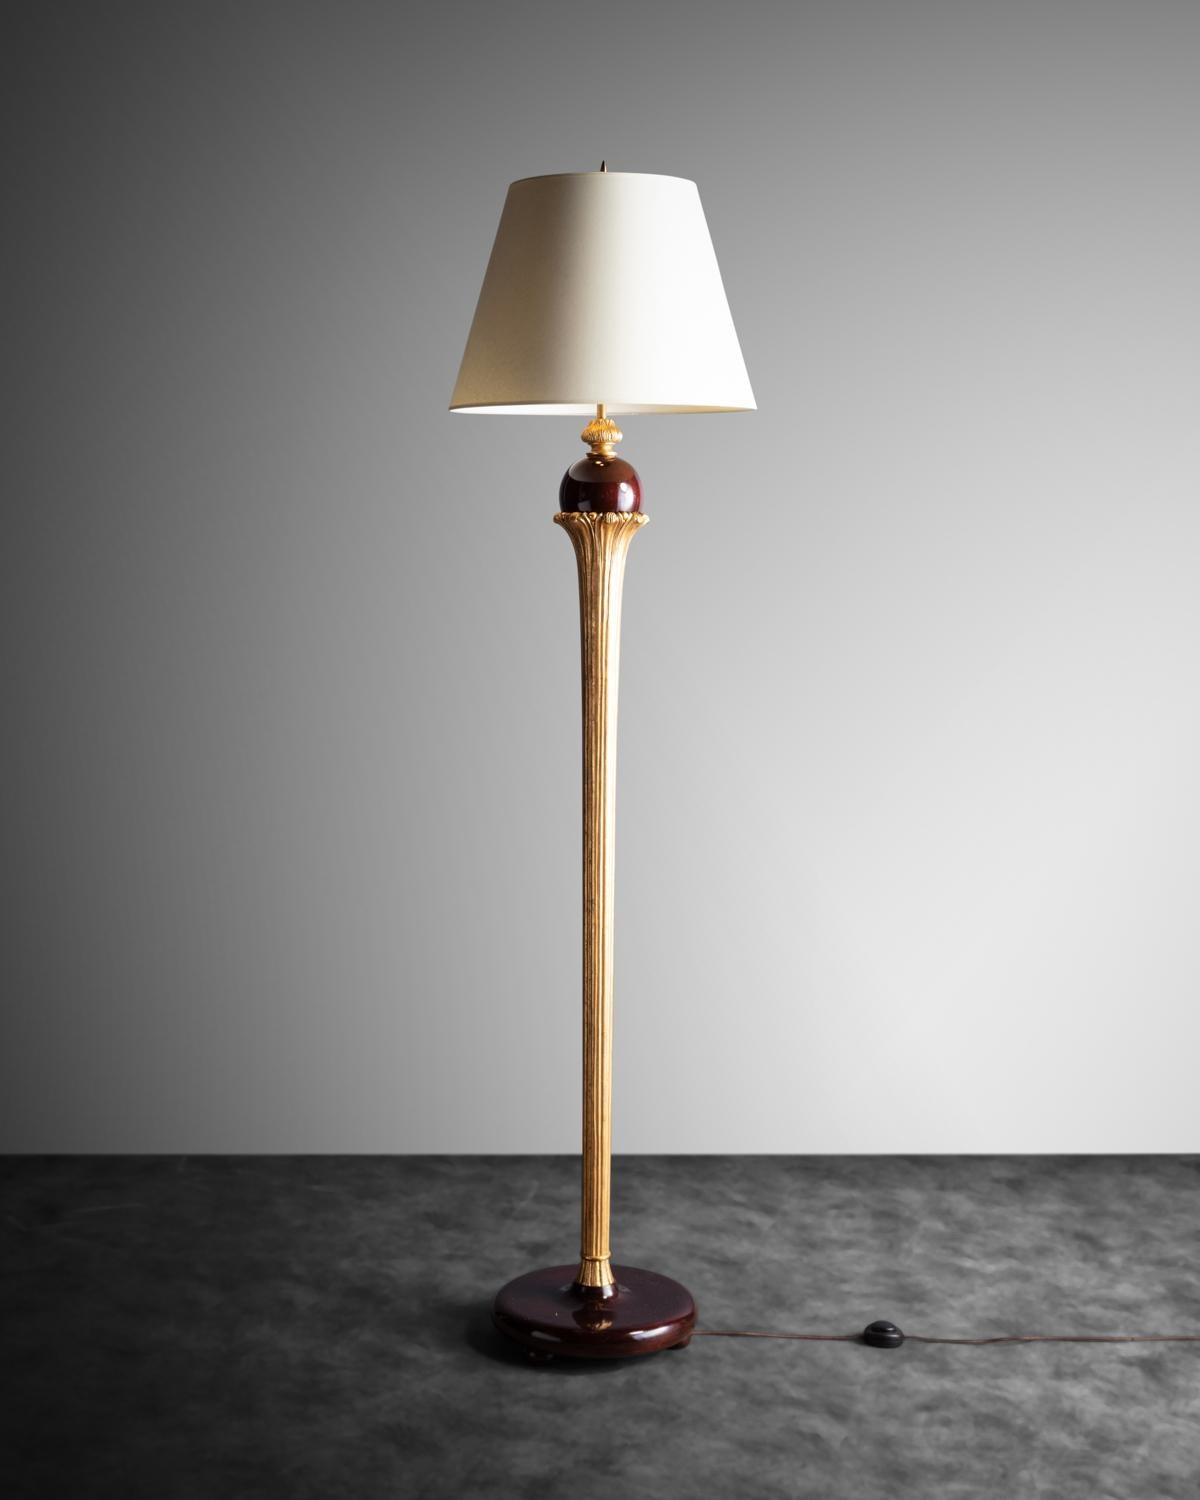 Classical Art Deco lamp with a polished mahogany base and identically finished wooden sphere held by a carved and gilded wooden stem with floral carvings.

(Lamp shade not included)